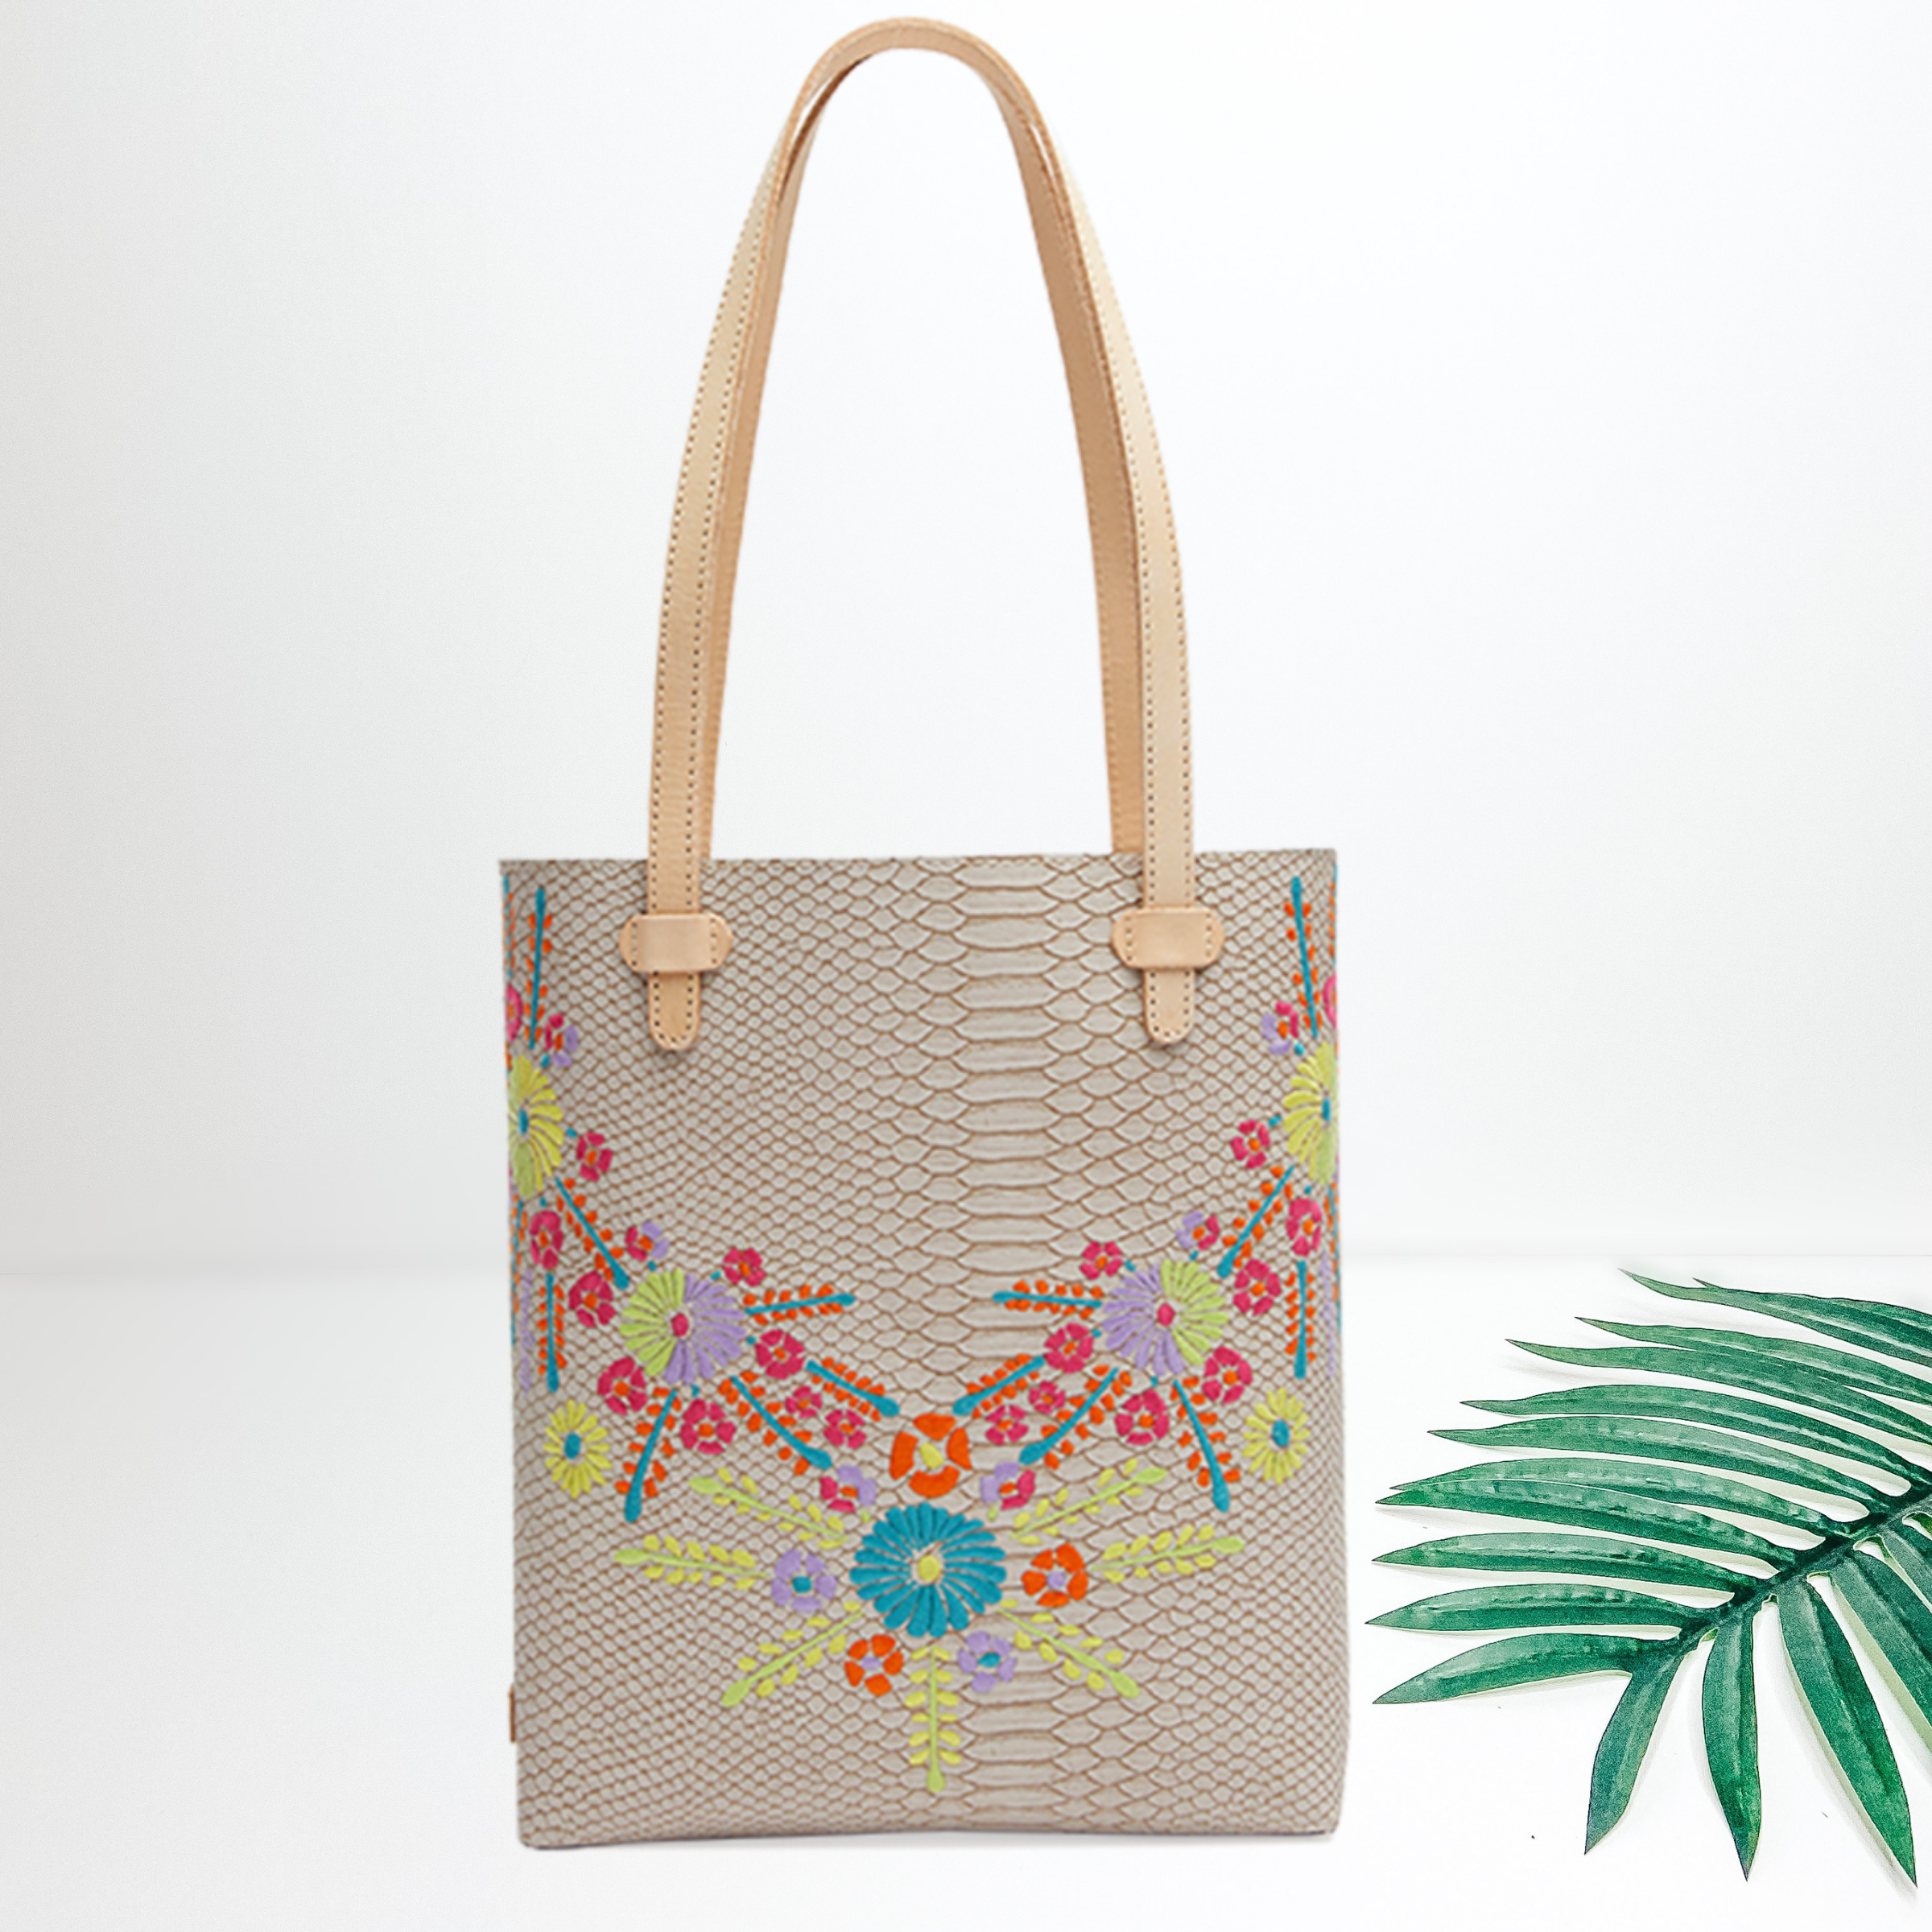 An ivory snakeskin tote bag with colorful floral embroidery. Pictured on white background with a green palm leaf.\